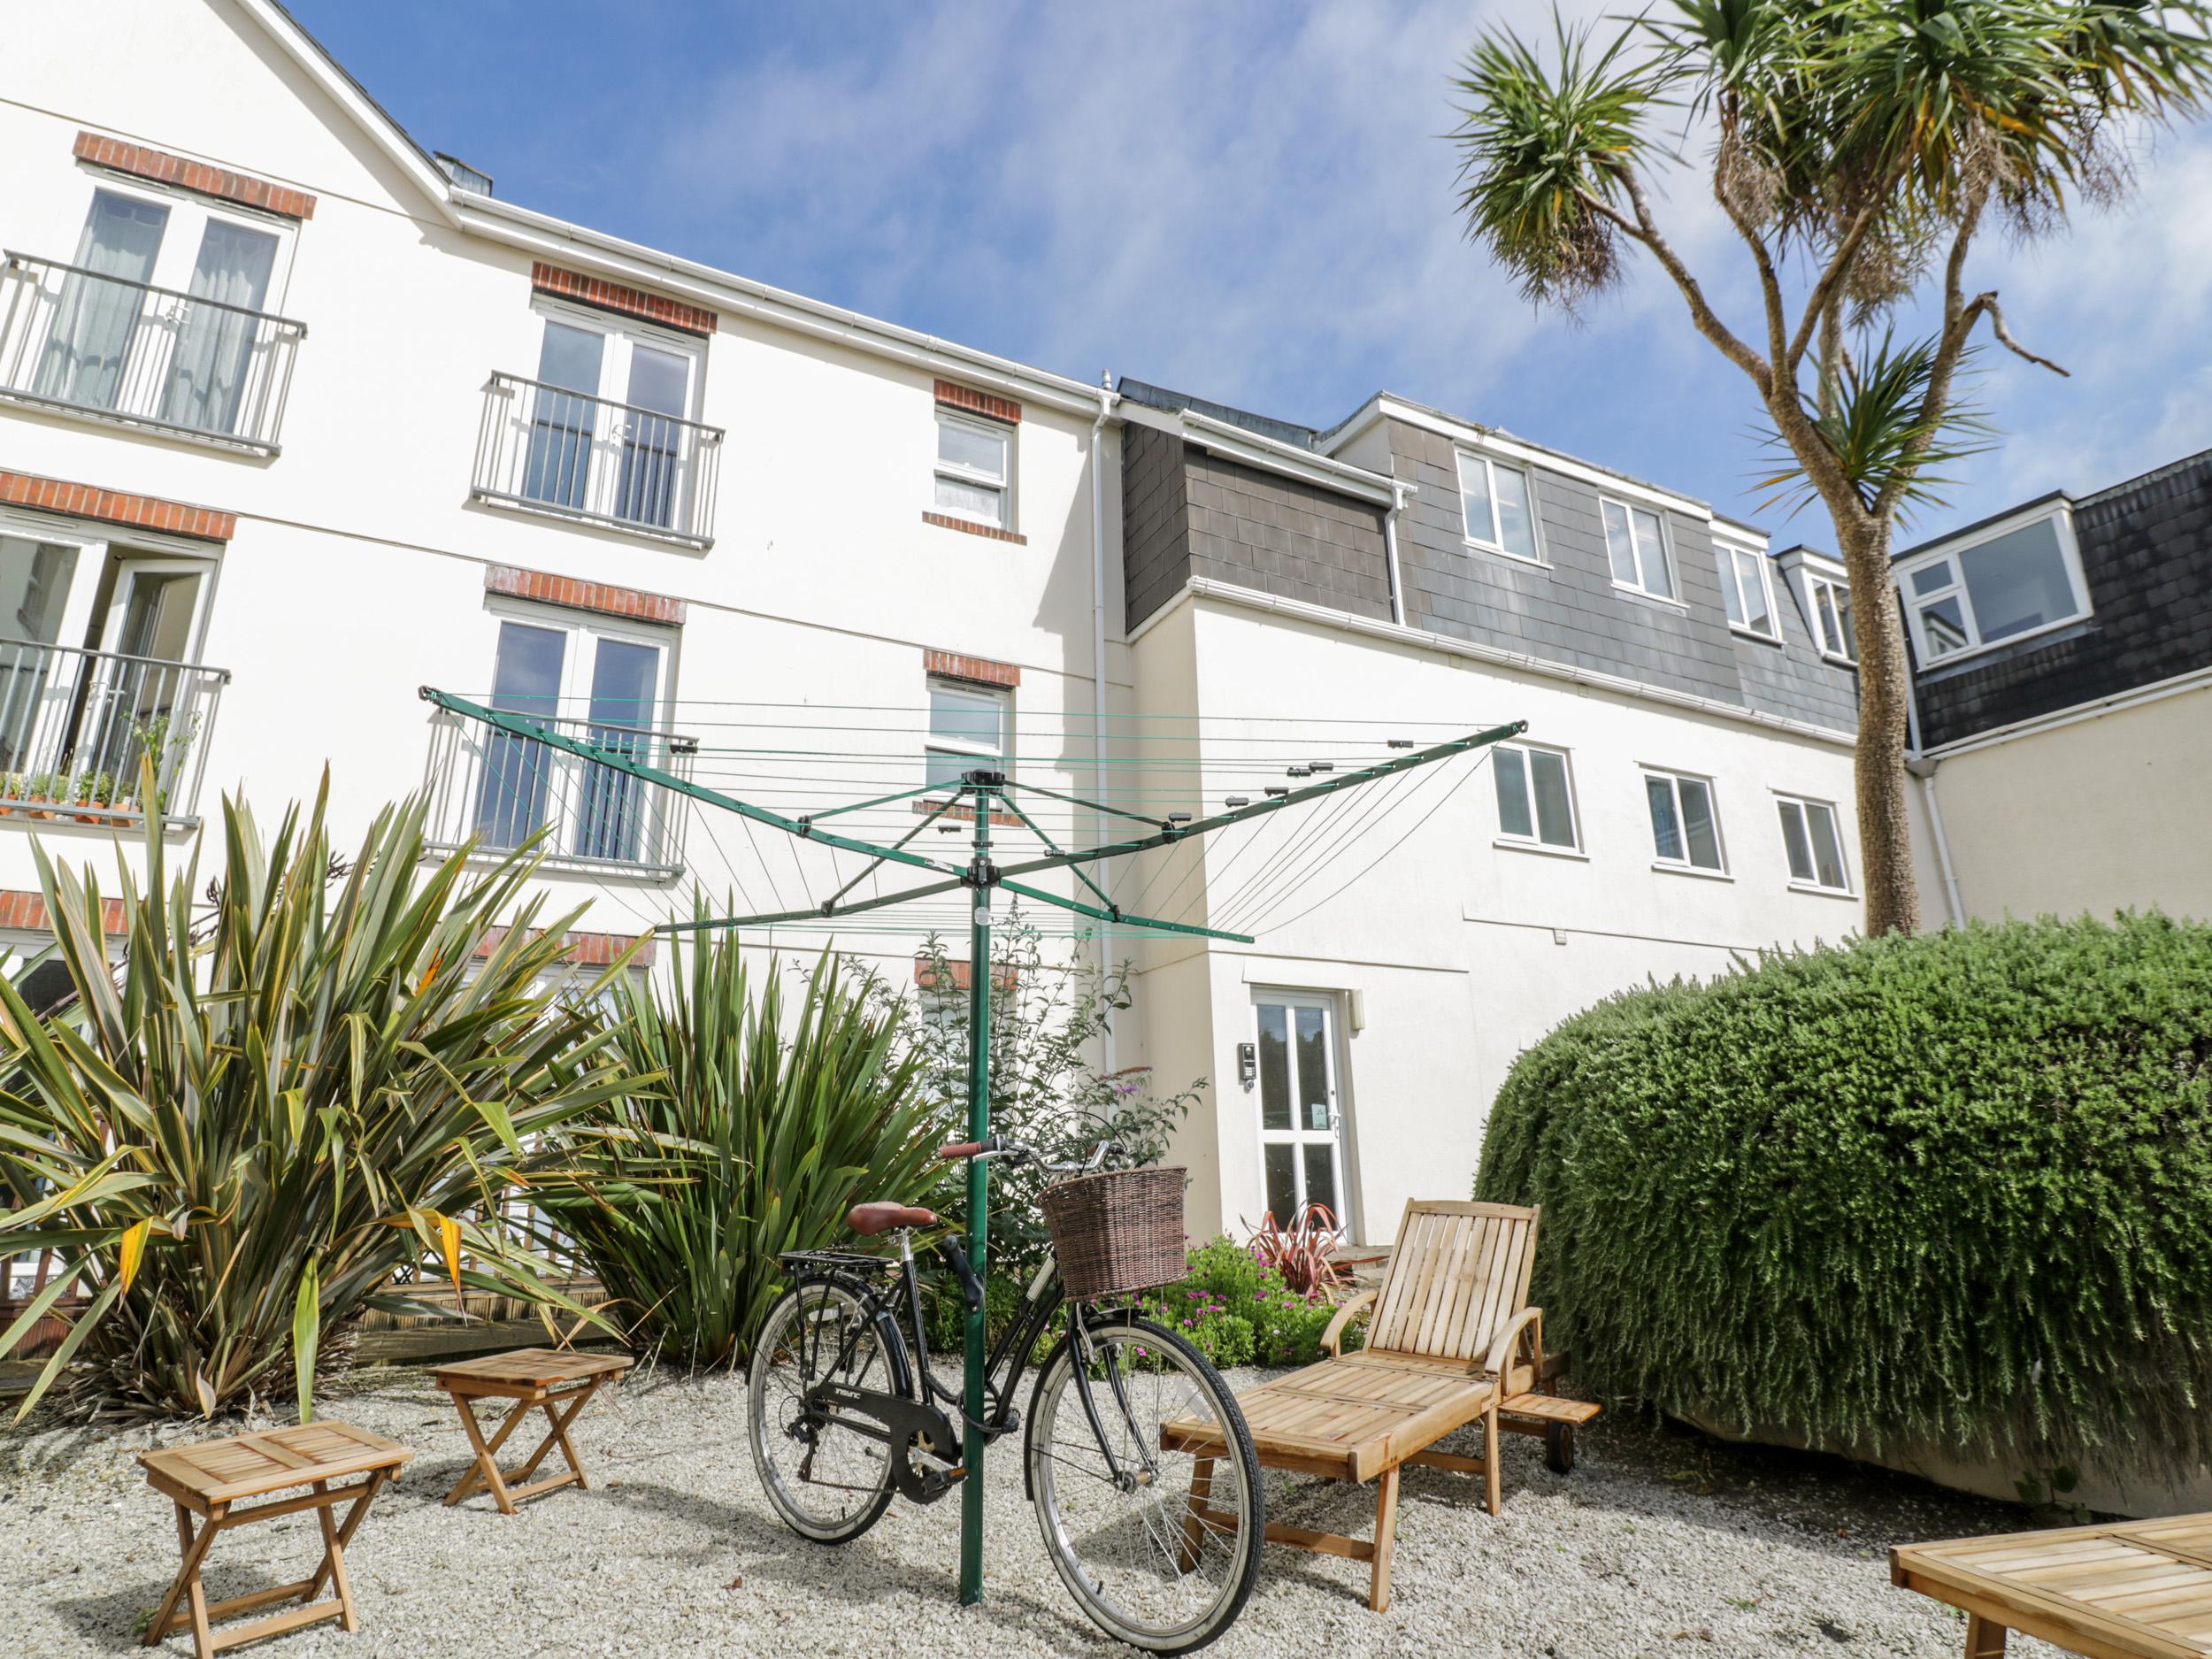 Holiday Cottage Reviews for Palm View - Self Catering Property in Newquay, Cornwall inc Scilly